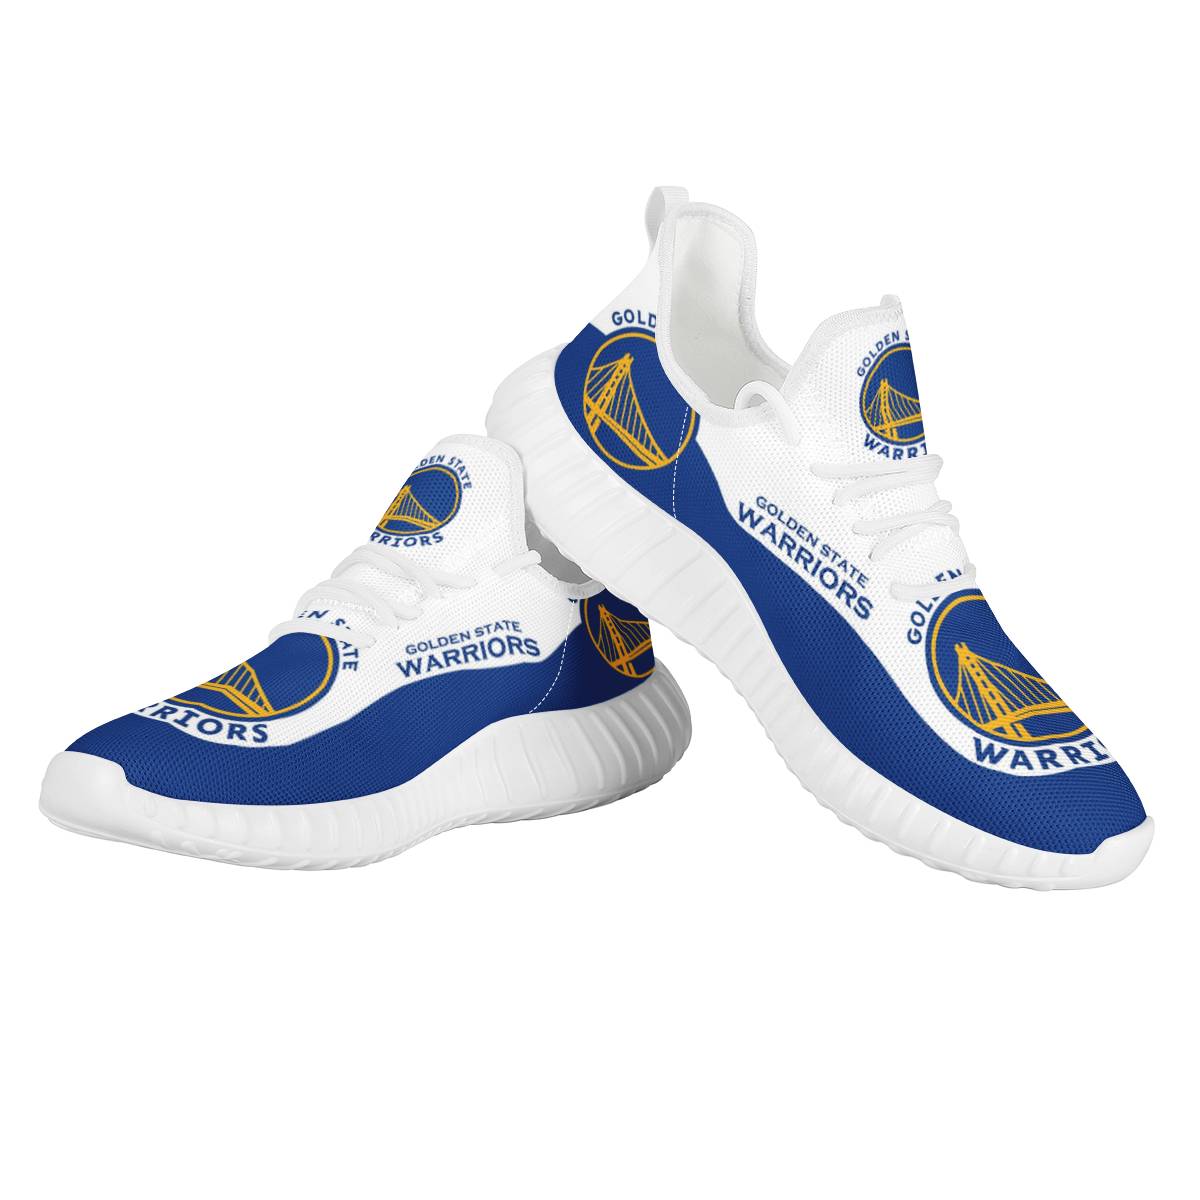 Women's Golden State Warriors Mesh Knit Sneakers/Shoes 003